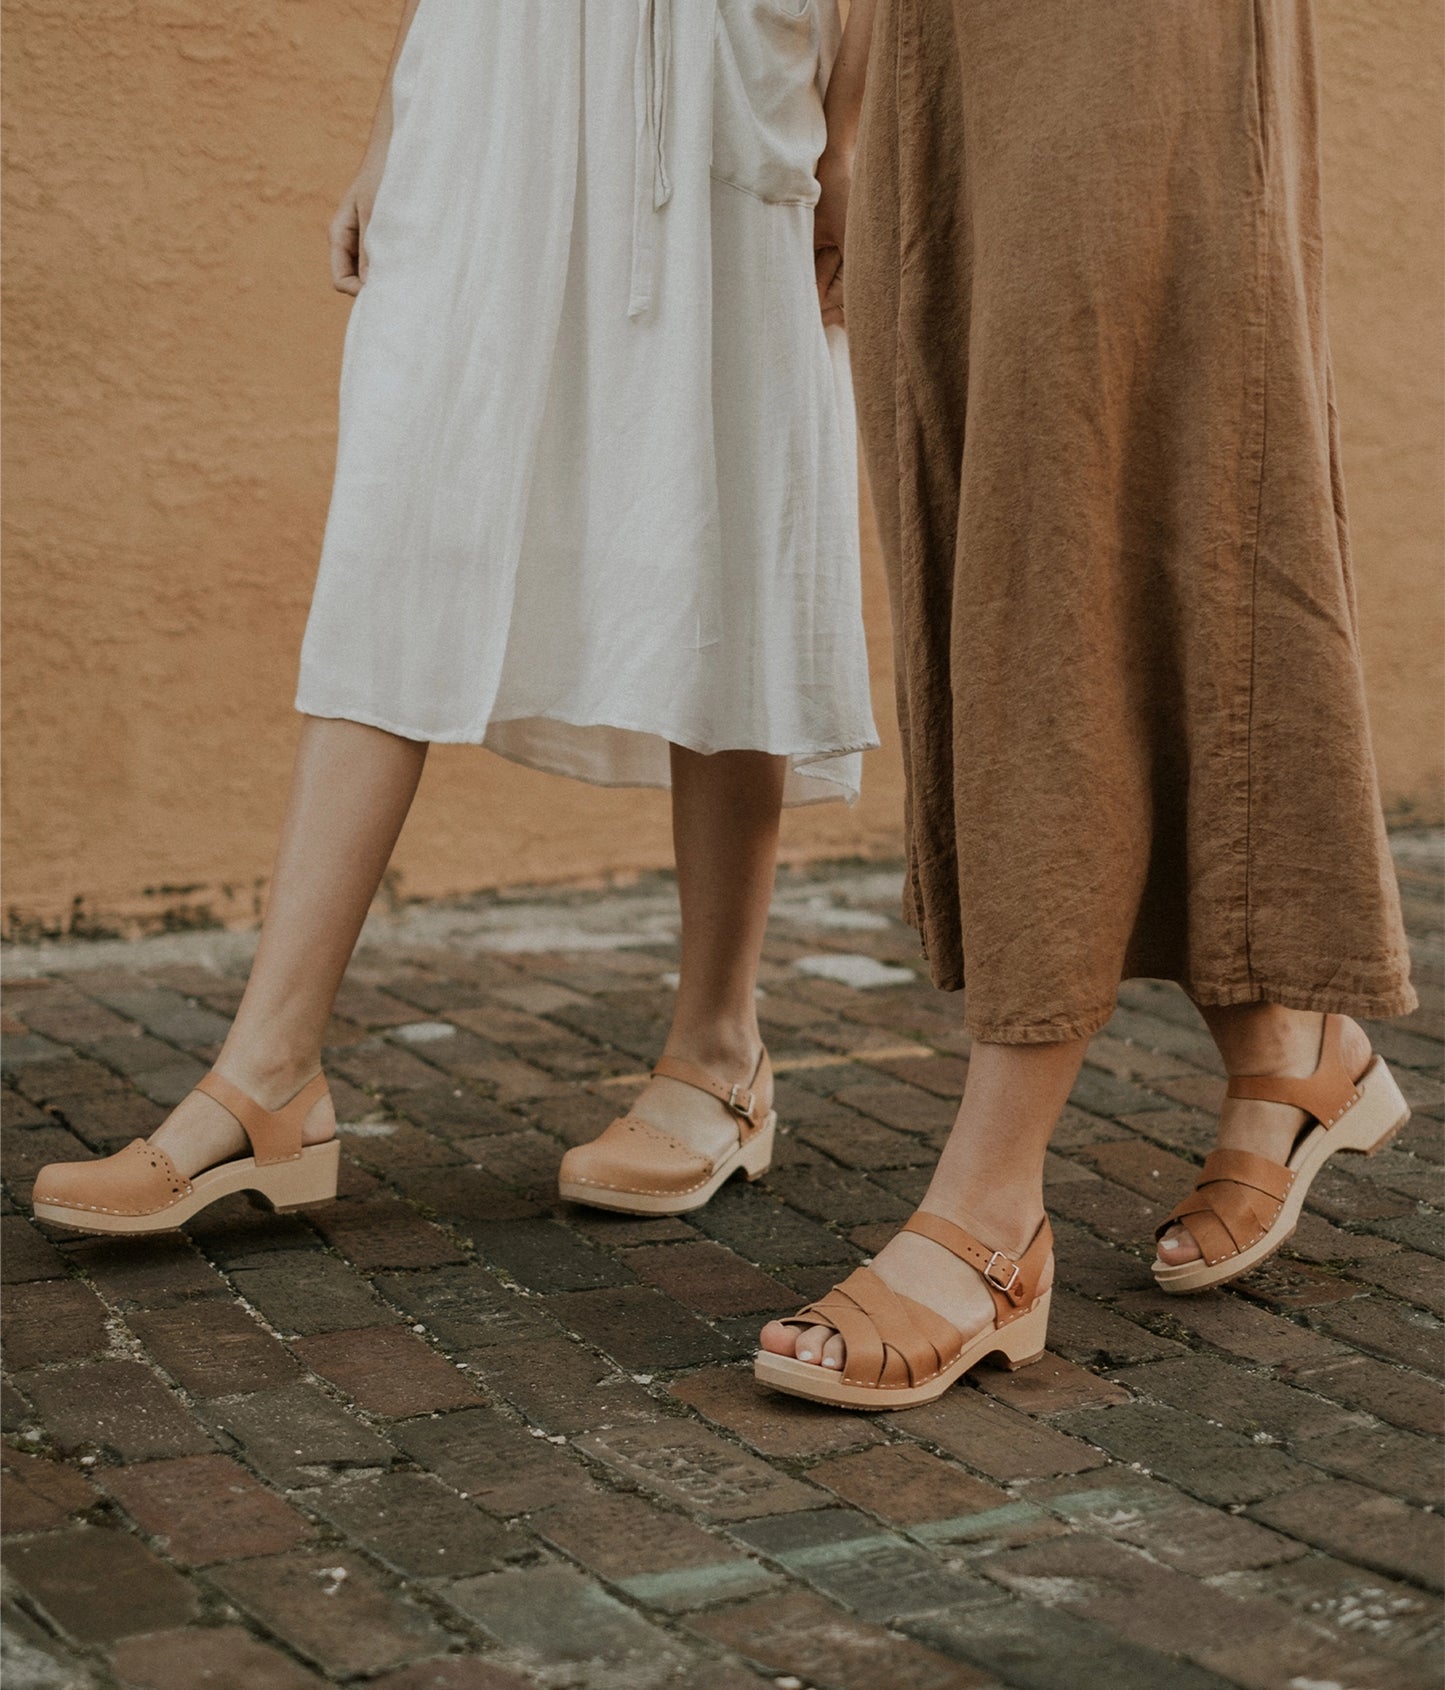 low-heeled clog sandals in ecru beige vegetable tanned leather with an open-toe stapled on a light wooden base